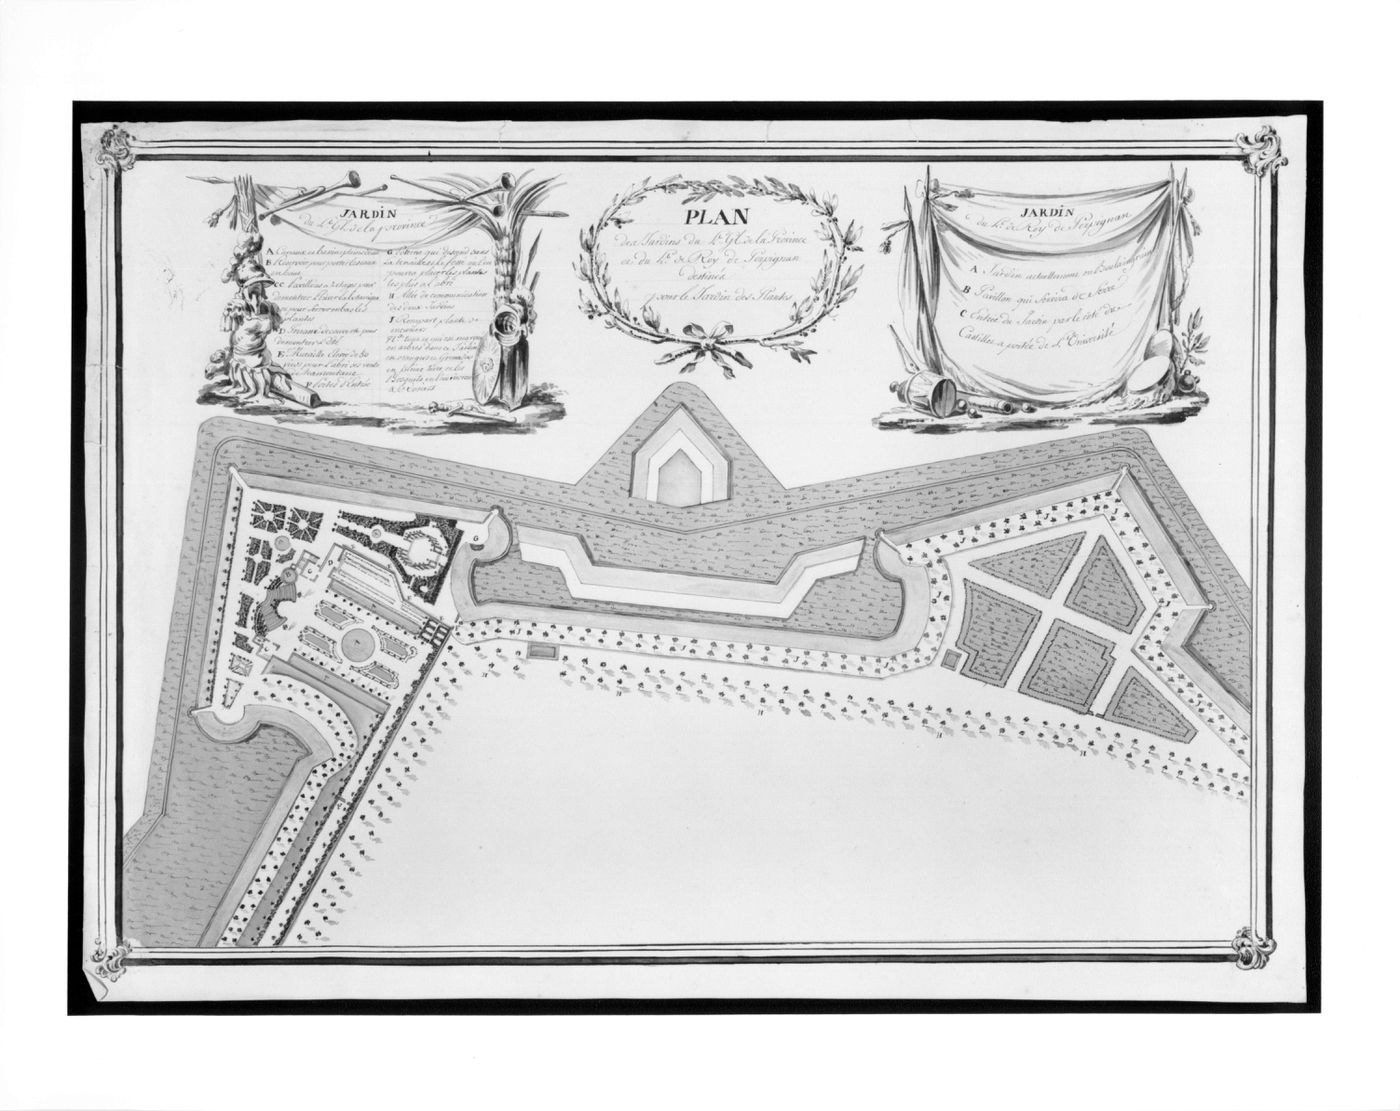 Plan for a garden within the fortifications at Perpignan